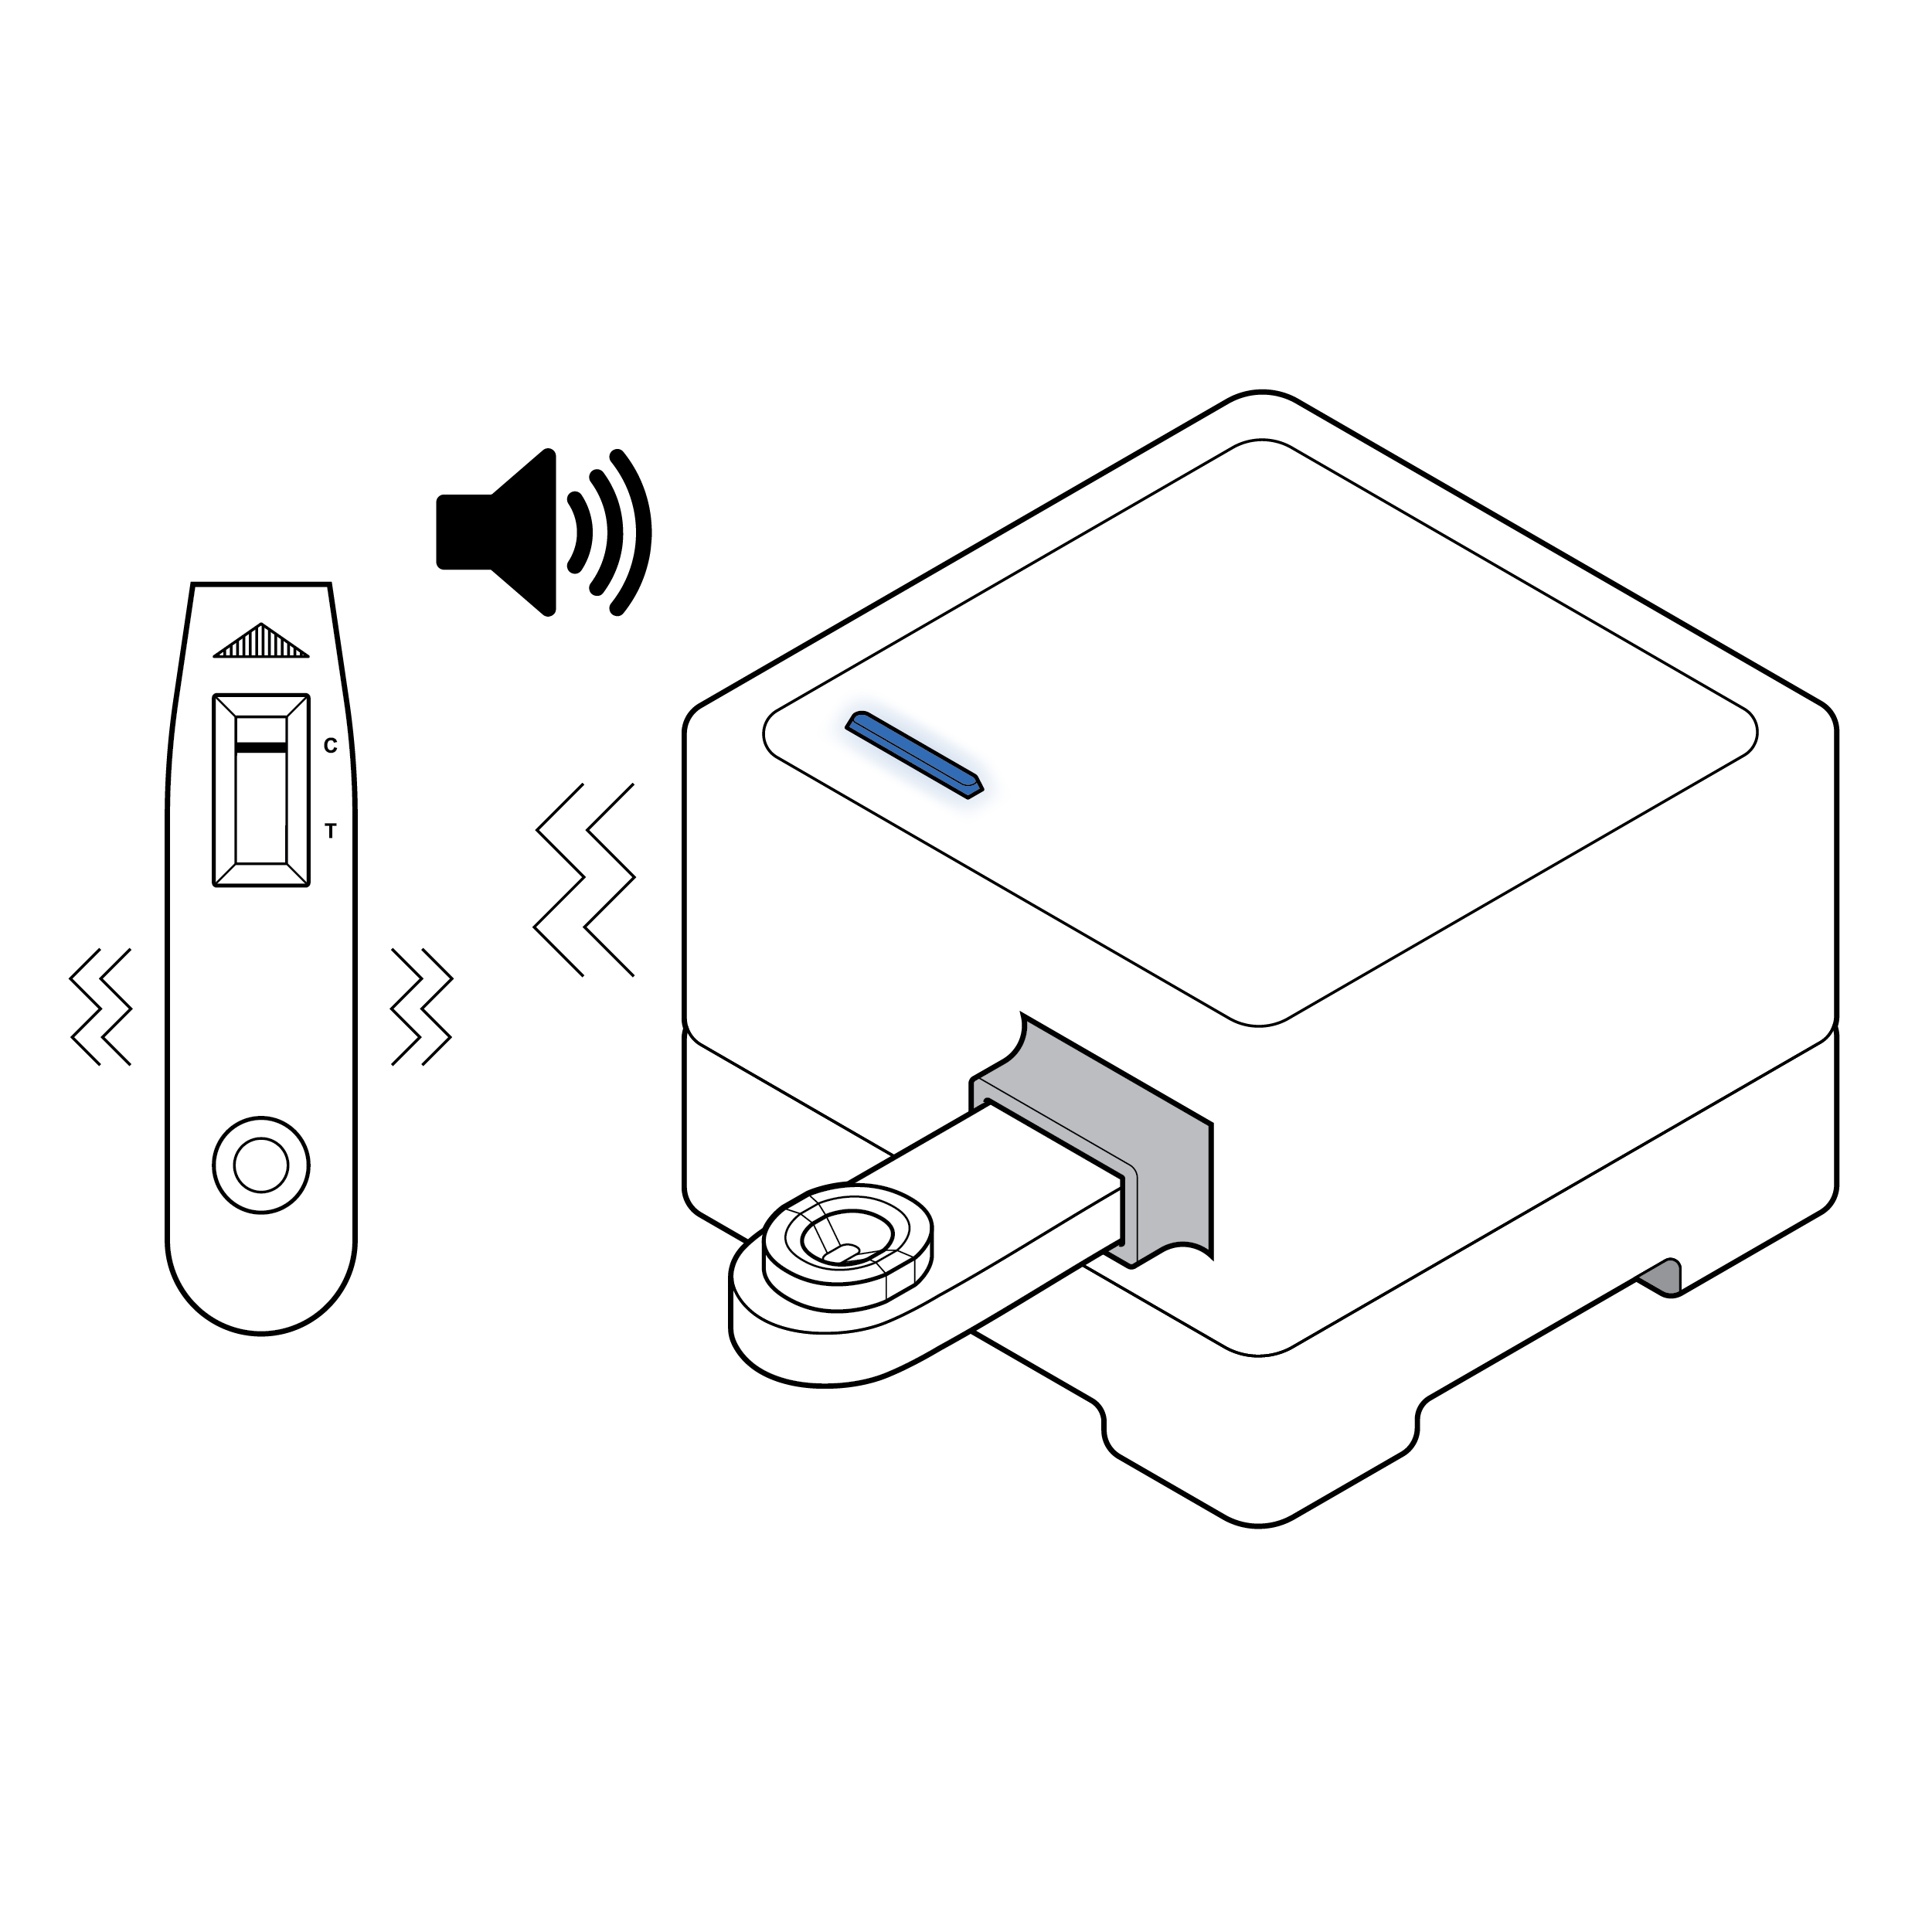 On the left, a cassette with results window showing a line next to the control mark. On the right, a test reader with a cassette inserted. Audio/sound symbol near the test reader indicates audible feedback. A LED light on top of the test reader indicates visual feedback. Haptic or vibration symbol indicates dynamic physical feedback.